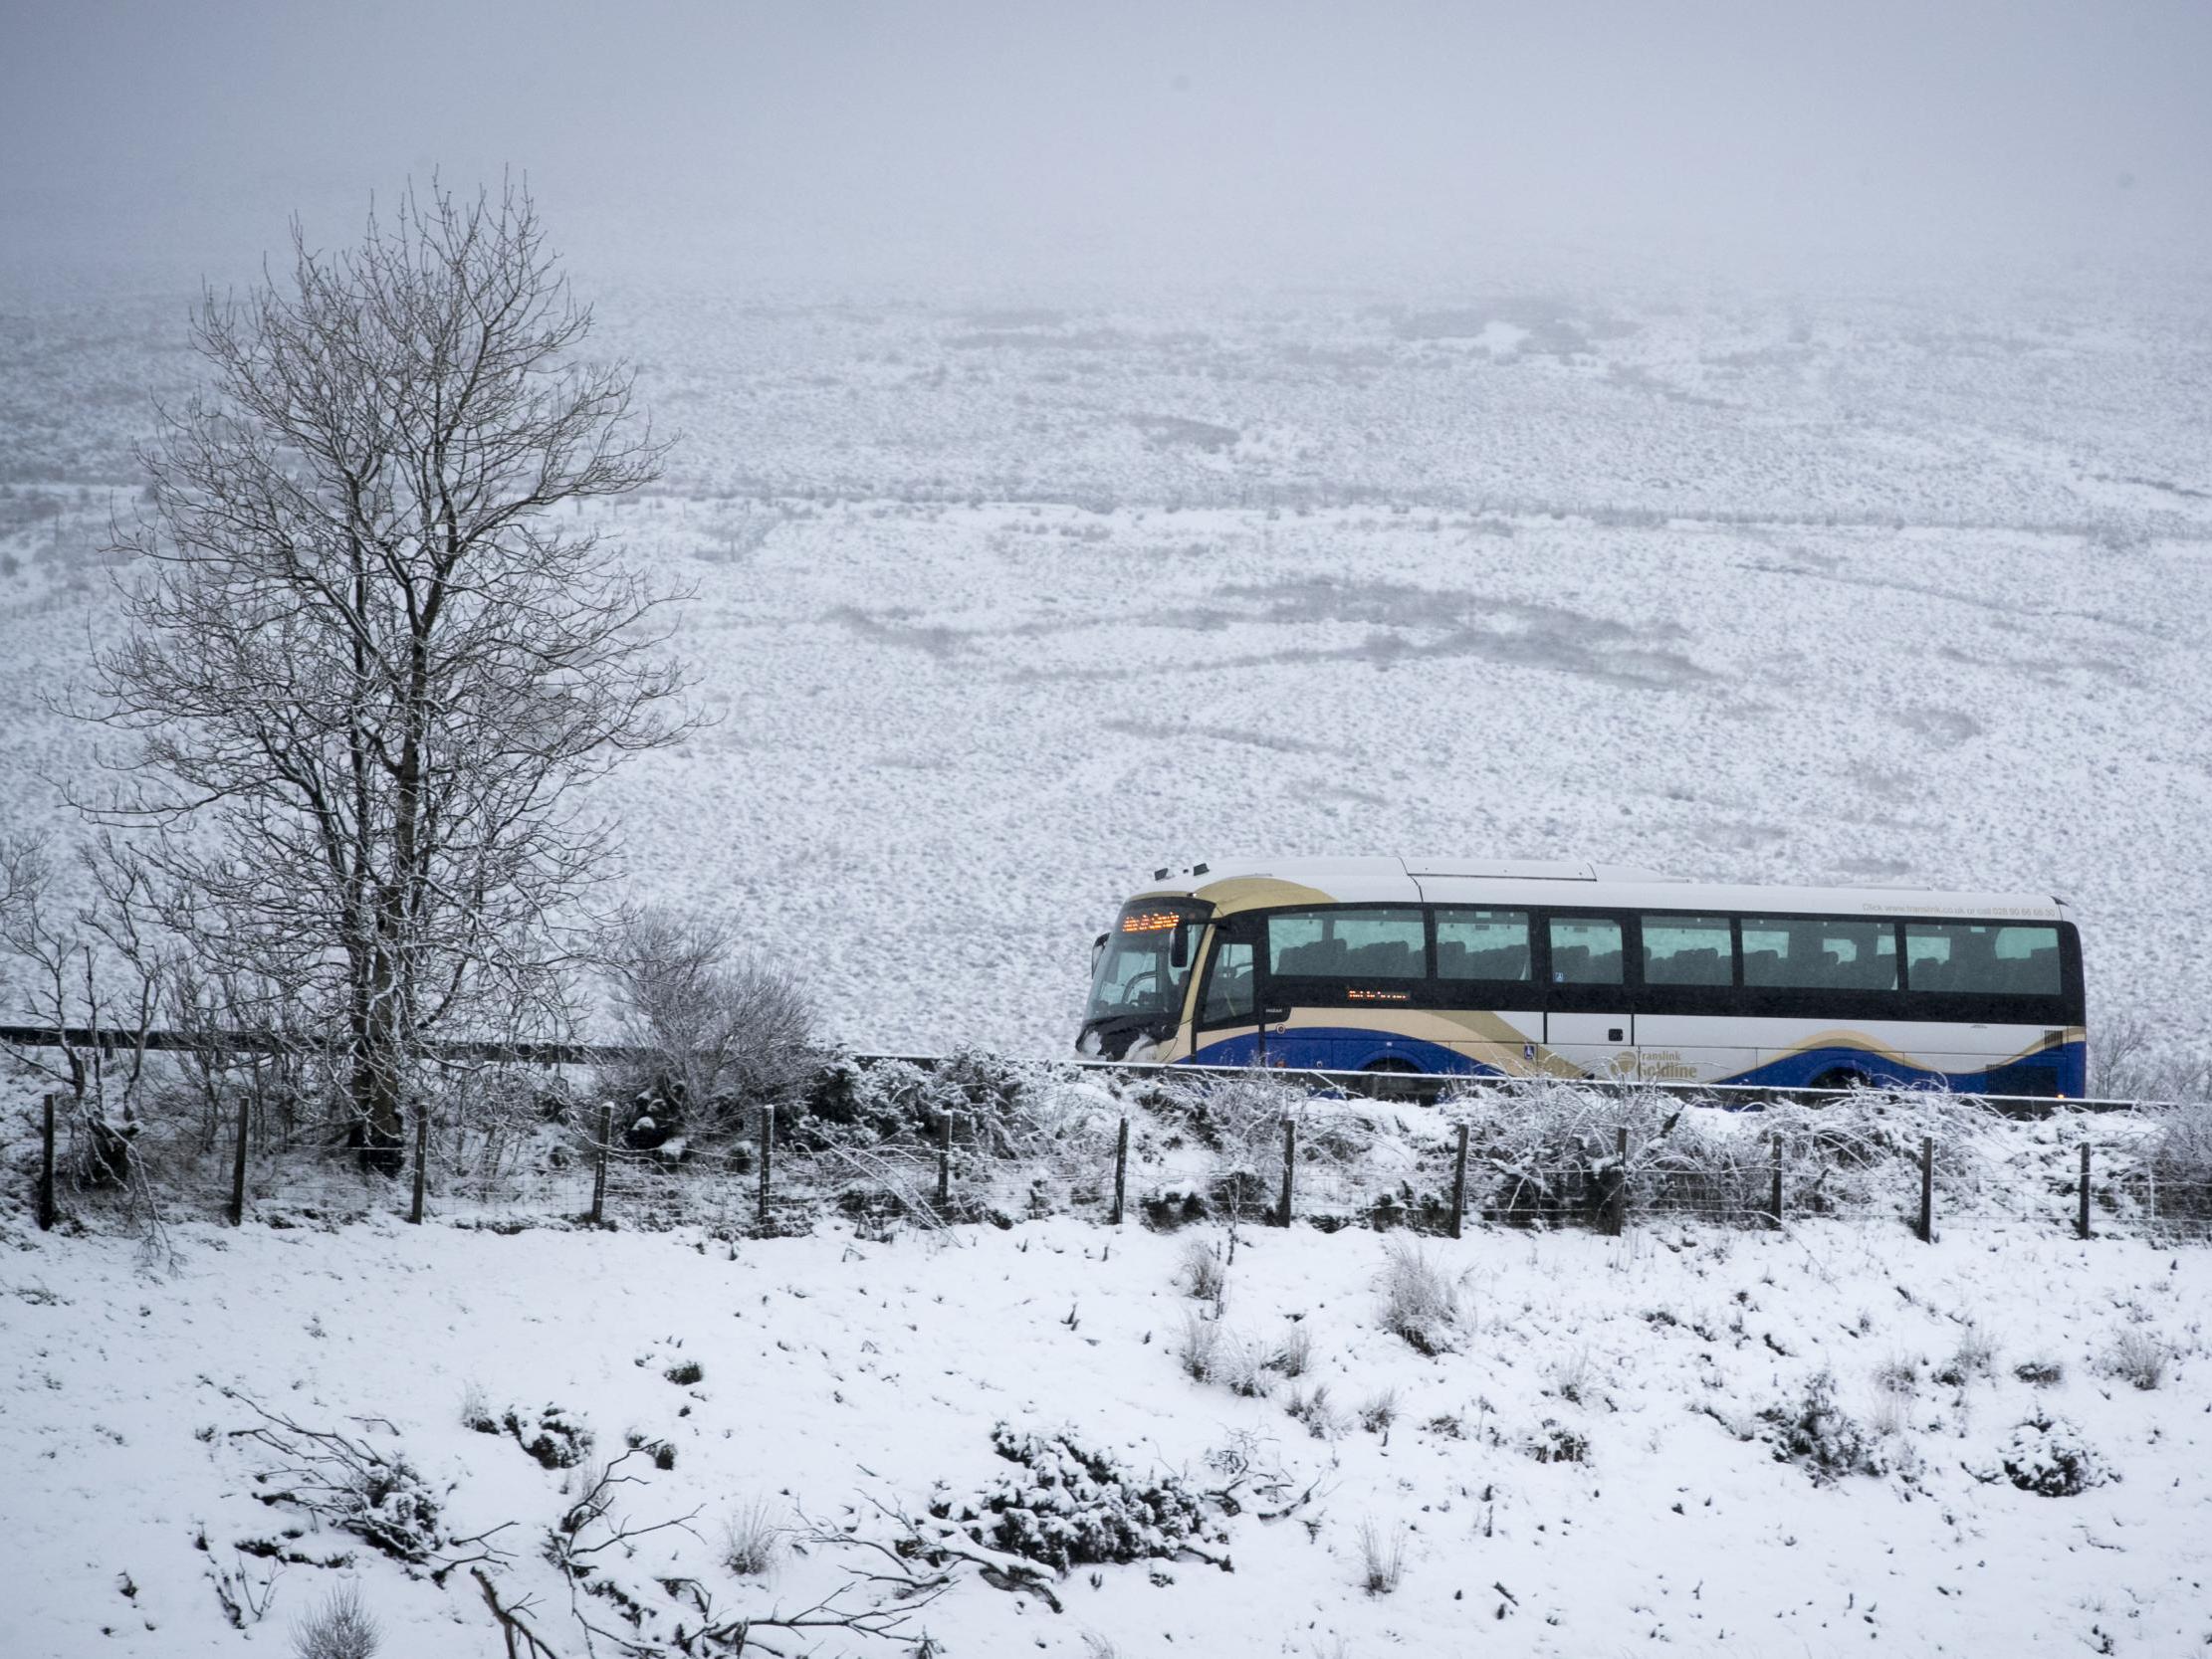 UK weather forecast: &apos;Heavy snow&apos; warnings issued by Met Office as freezing conditions sweep country and temperatures fall